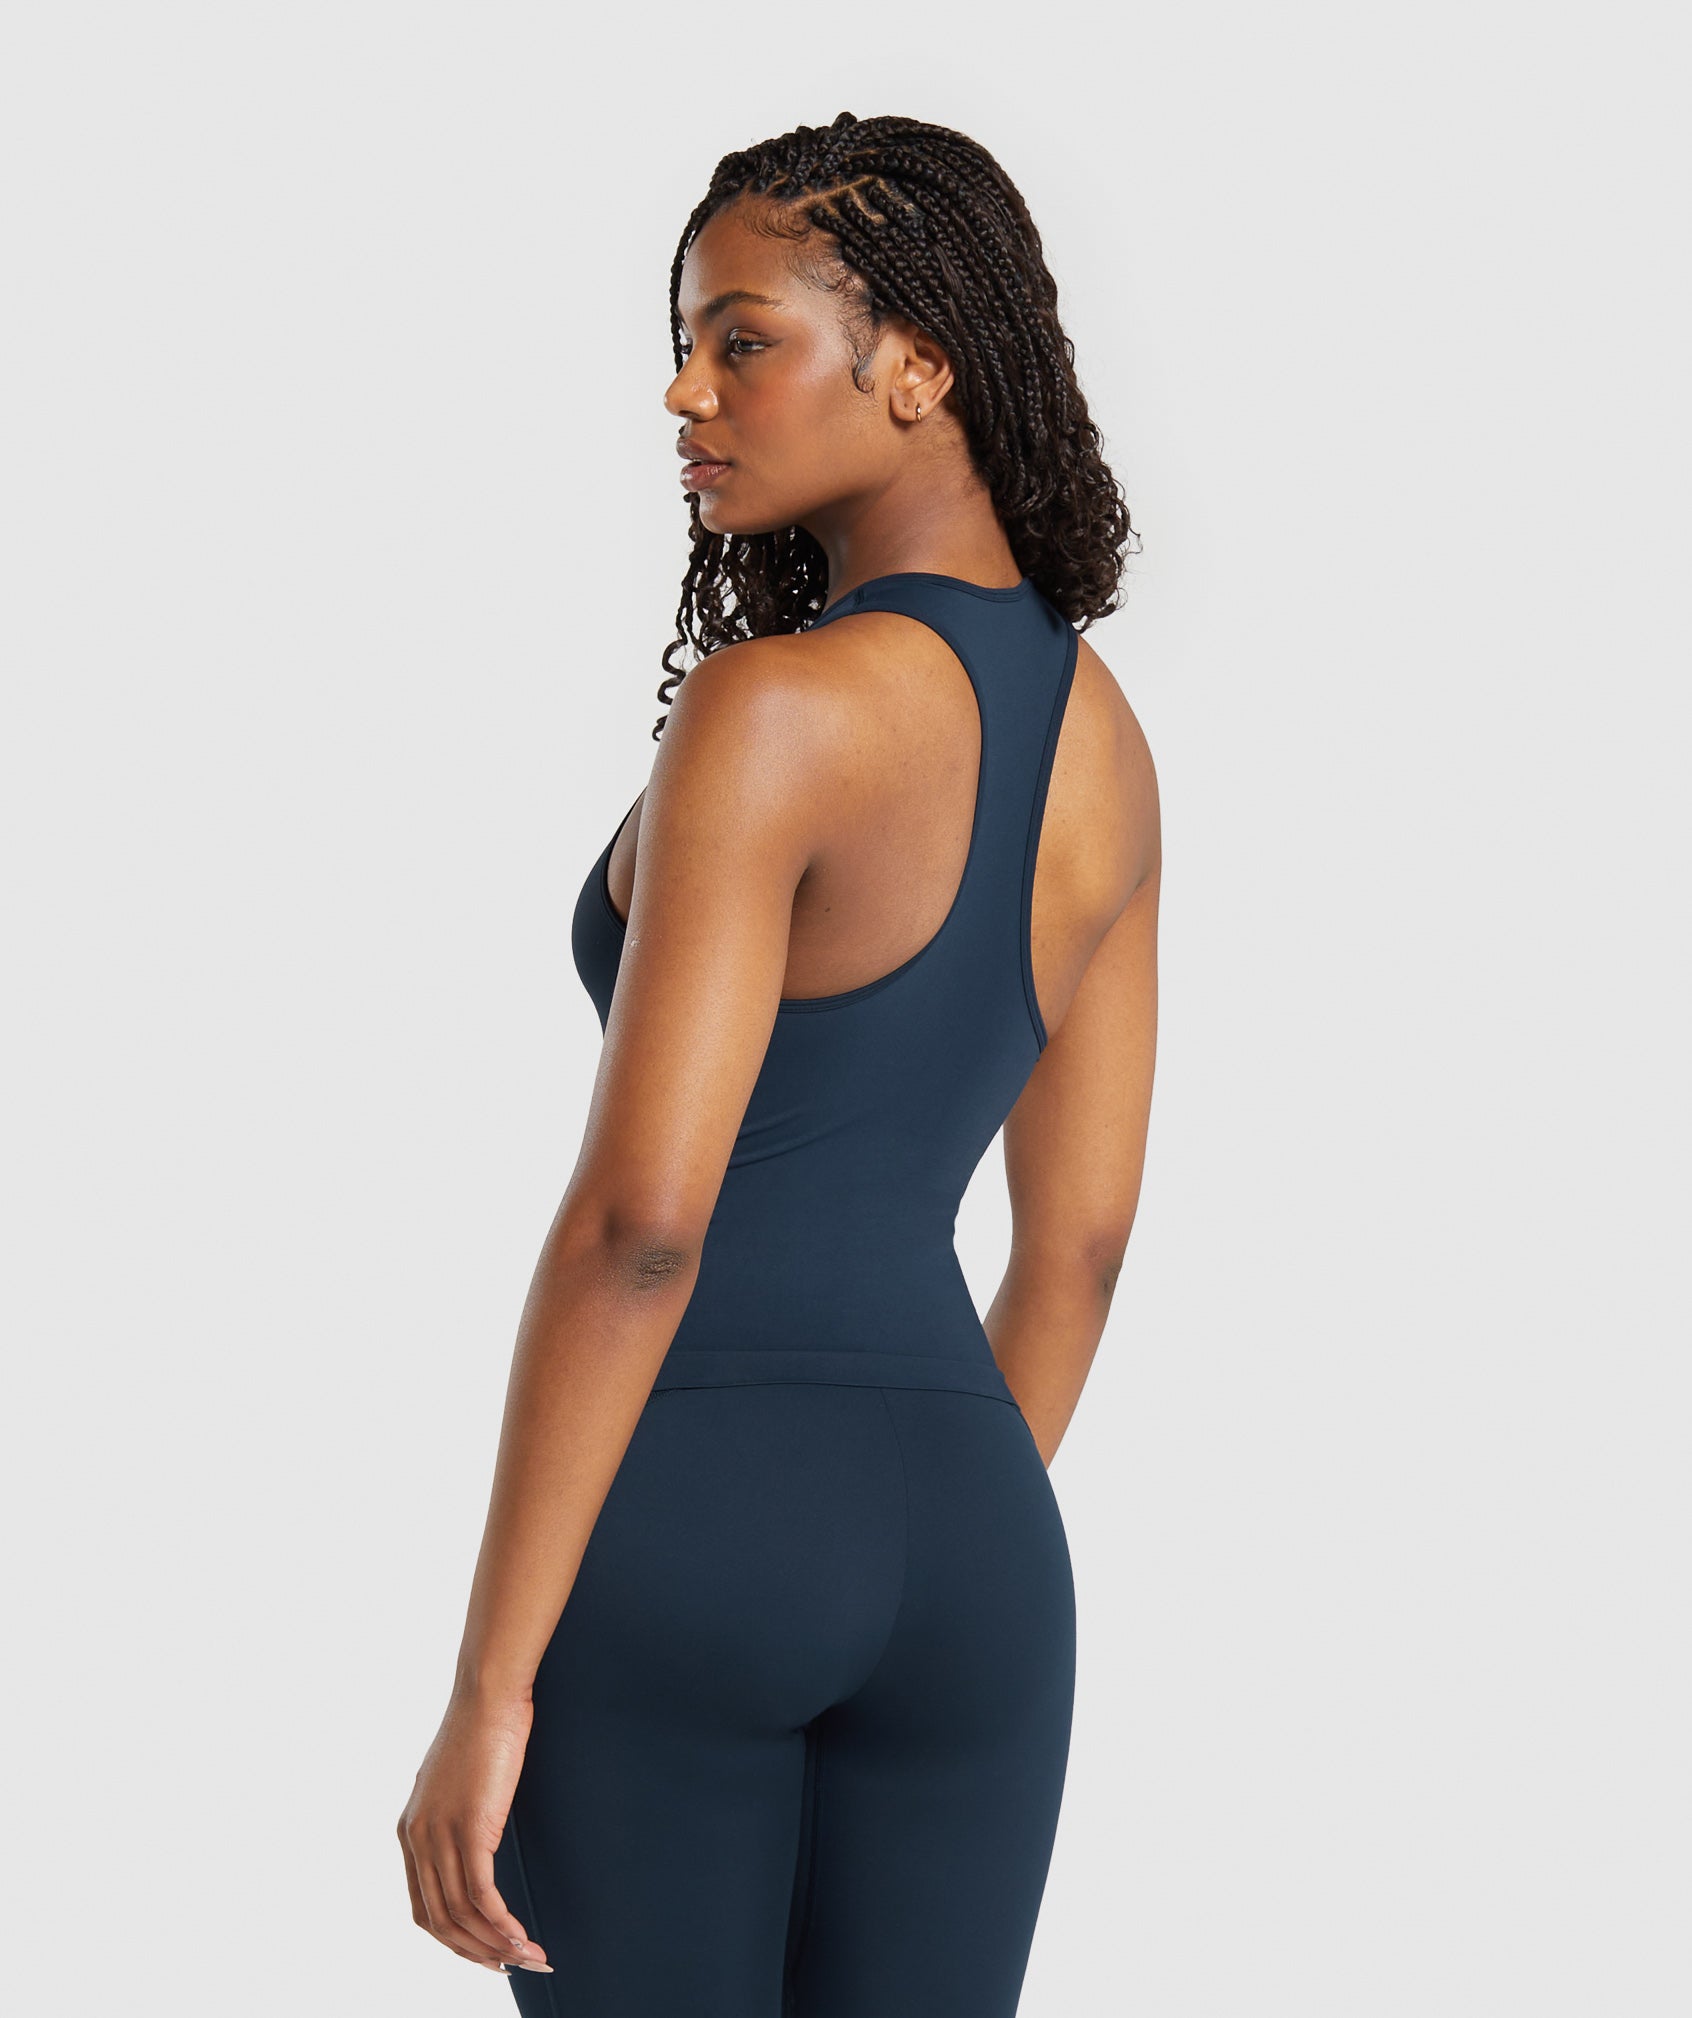 Everyday Seamless Tight Fit Tank in Navy - view 2